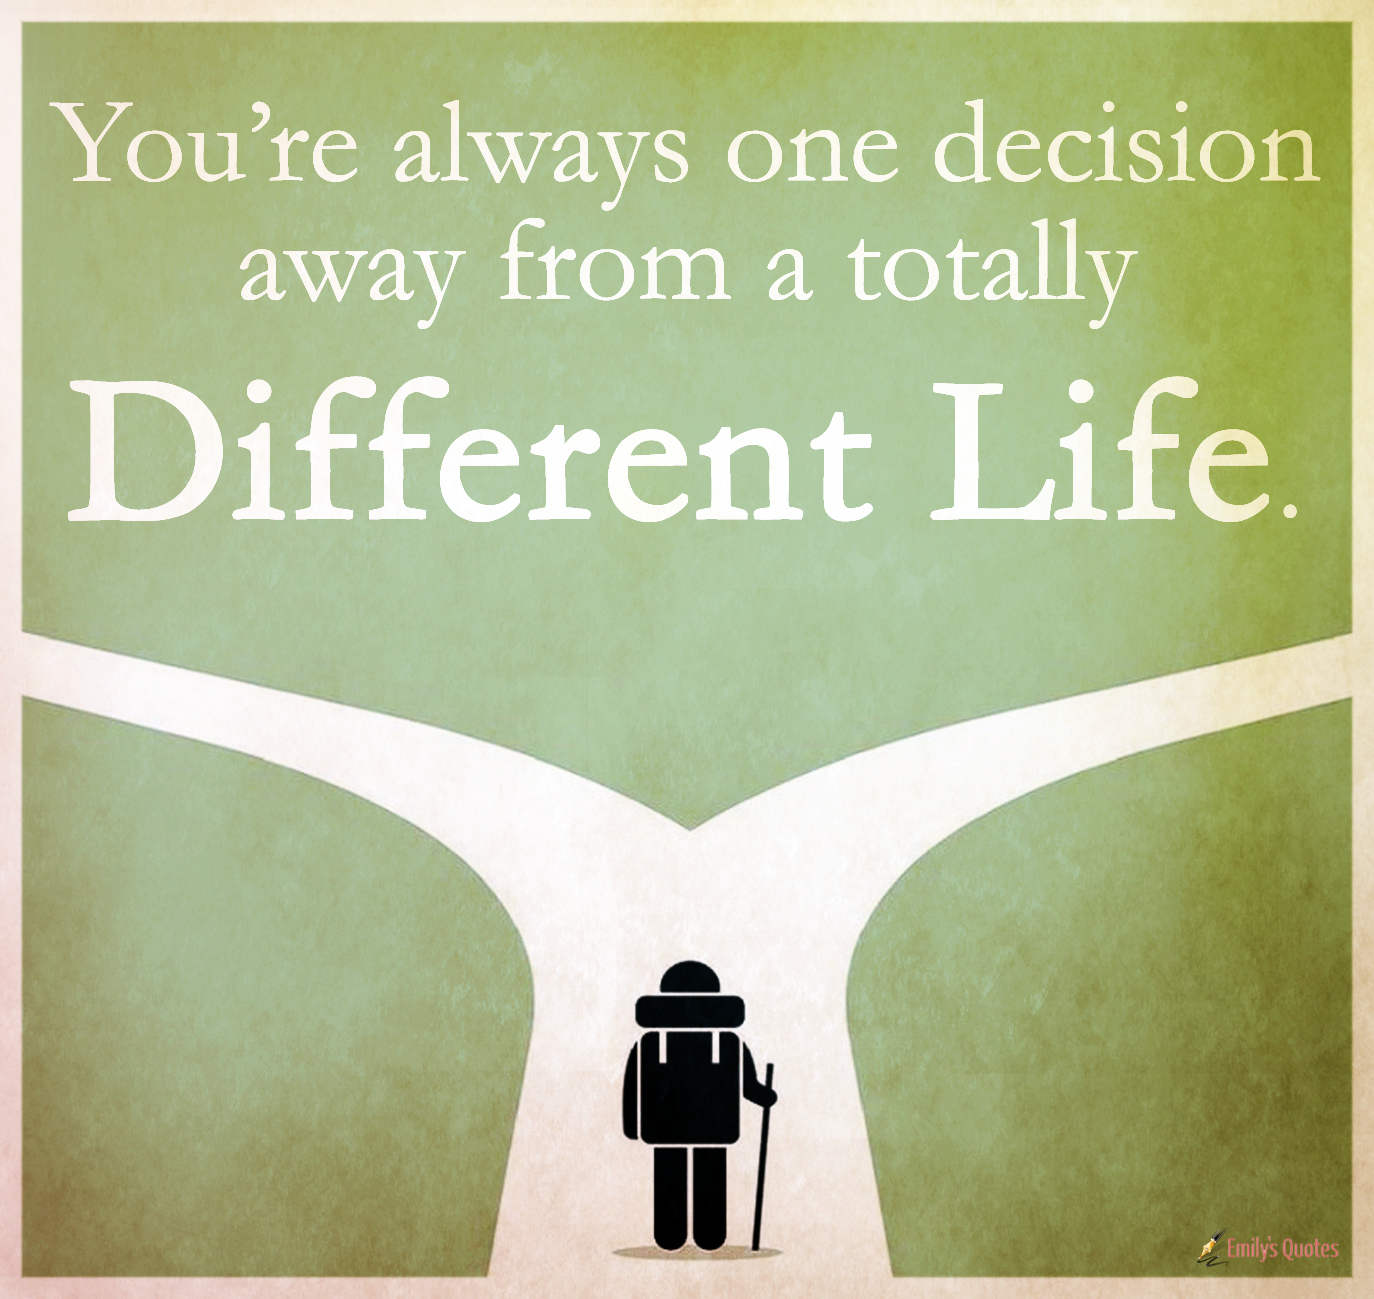 You’re always one decision away from a totally Different Life